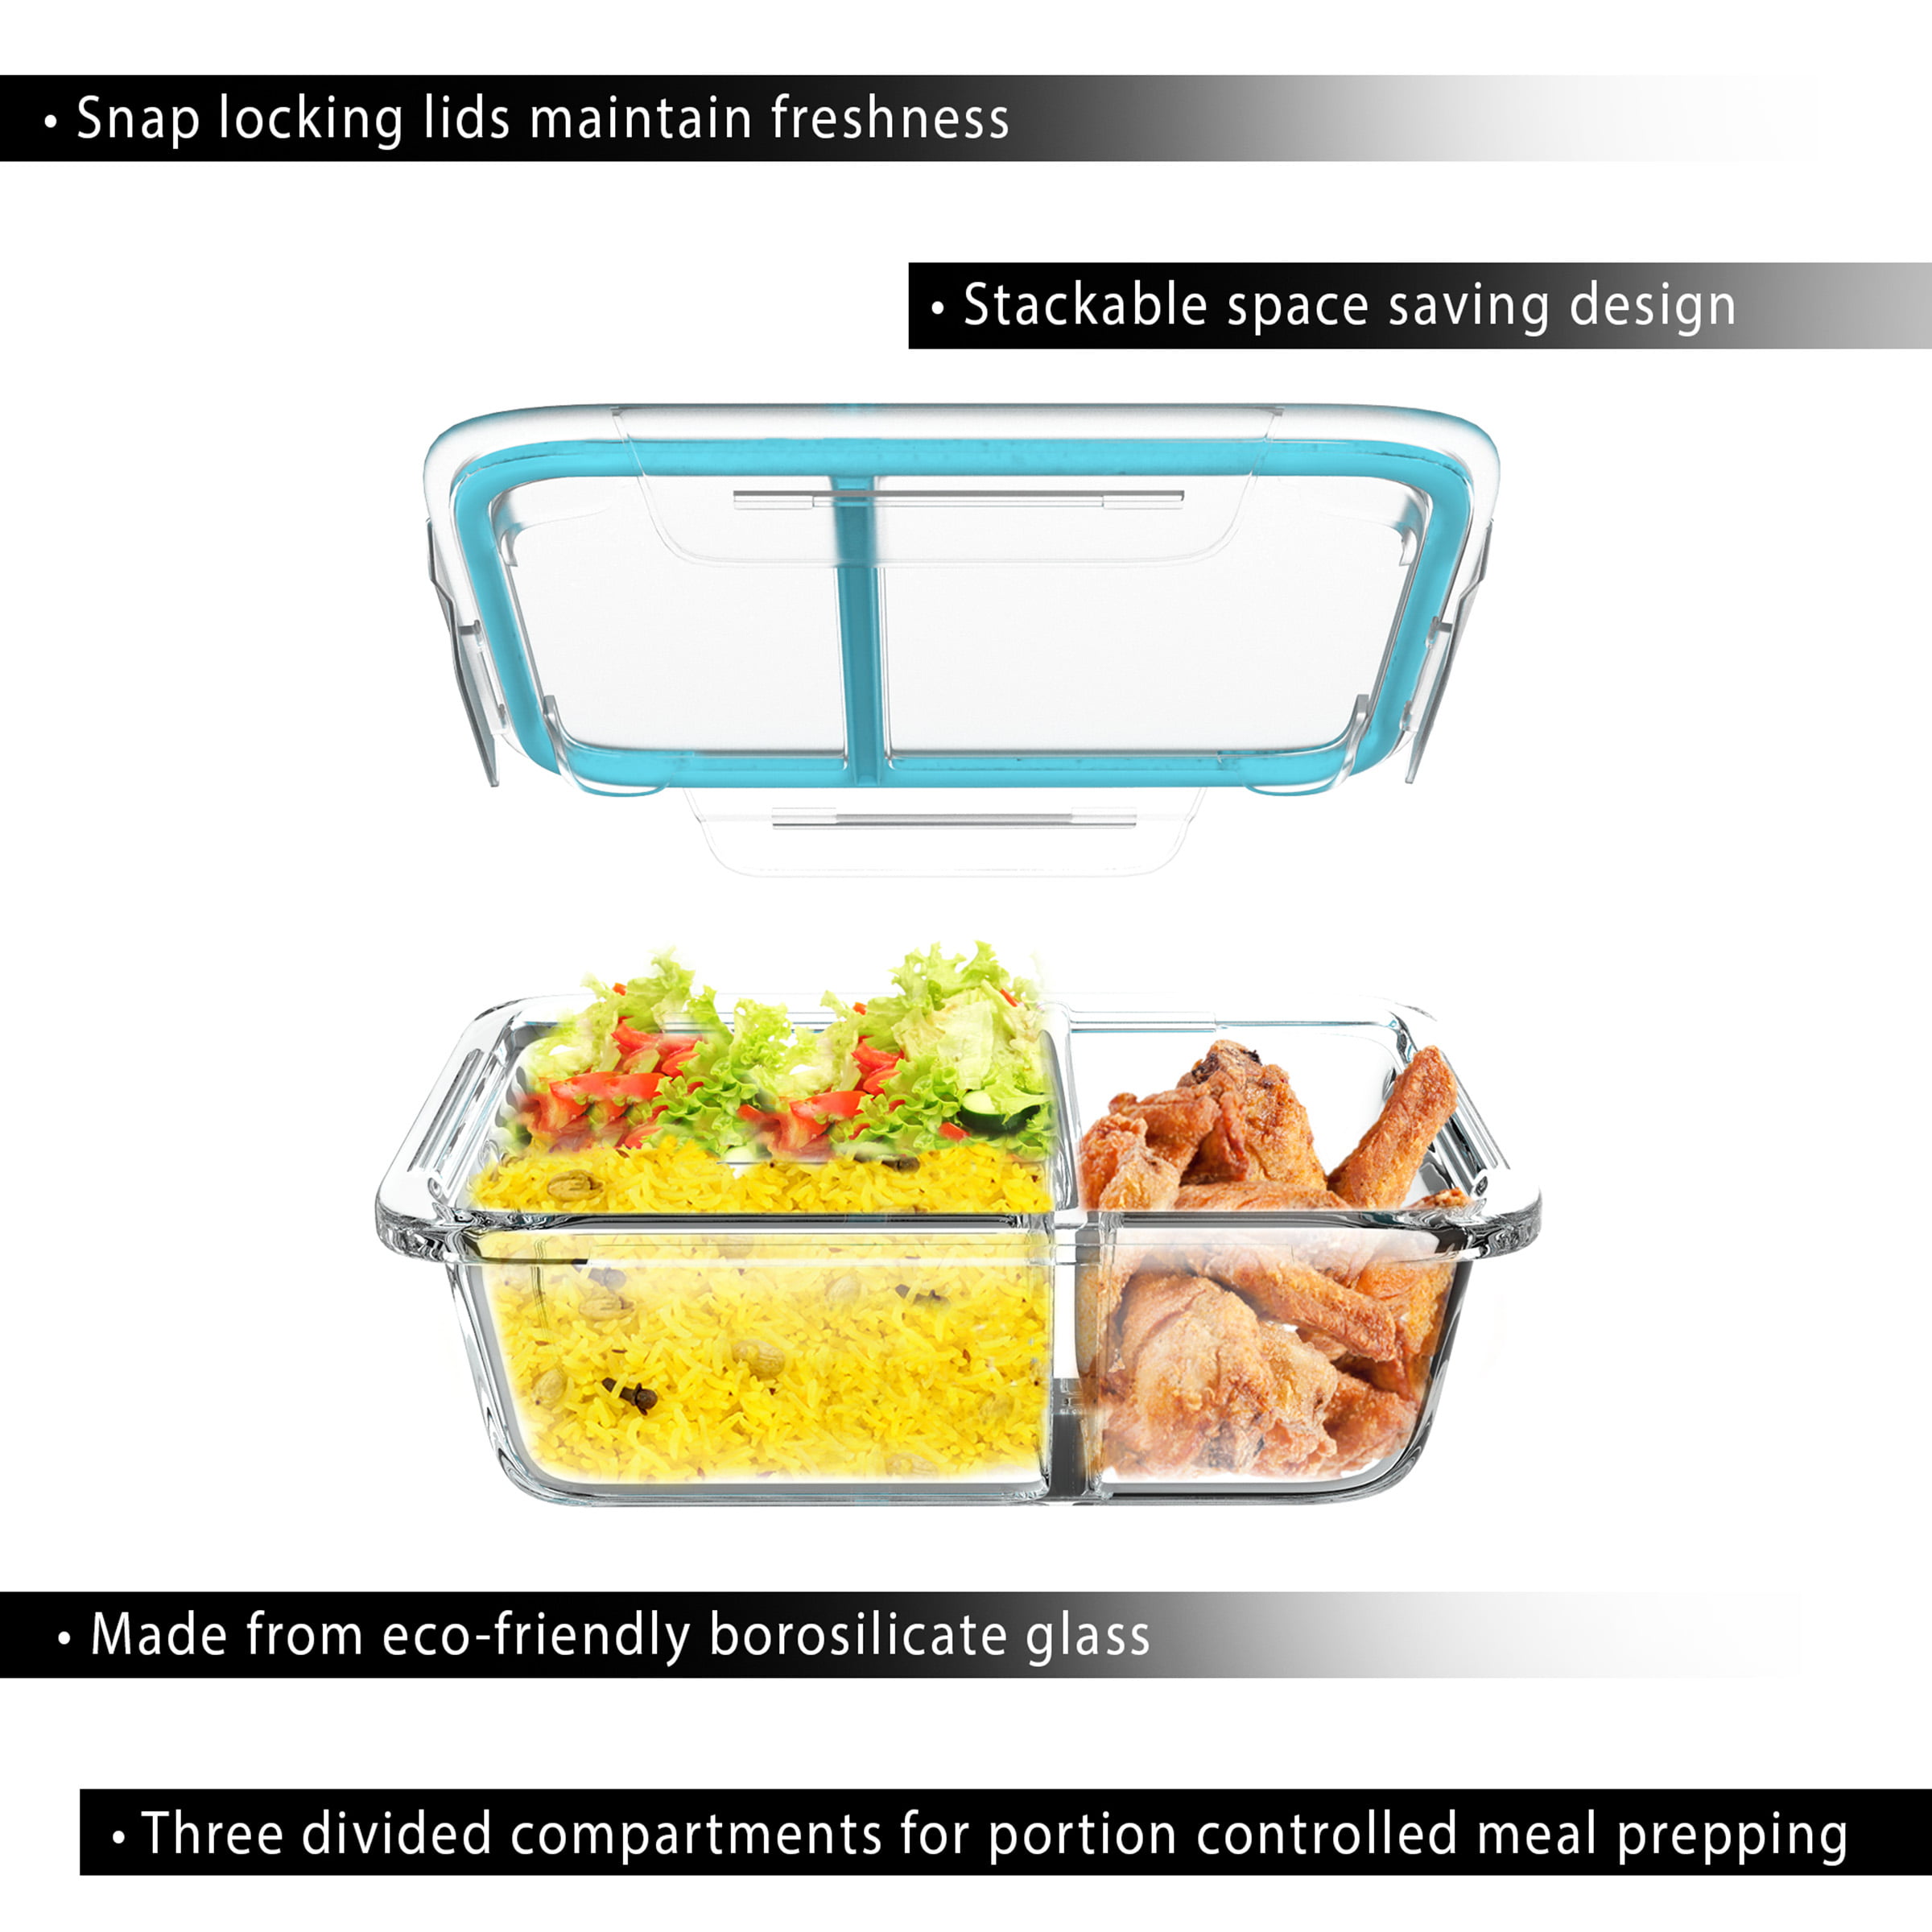  Bayco 10 Pack Glass Meal Prep Containers 2 Compartment, Glass  Food Storage Containers with Lids, Airtight Glass Lunch Bento Boxes,  BPA-Free & Leak Proof (10 lids & 10 Containers) - White